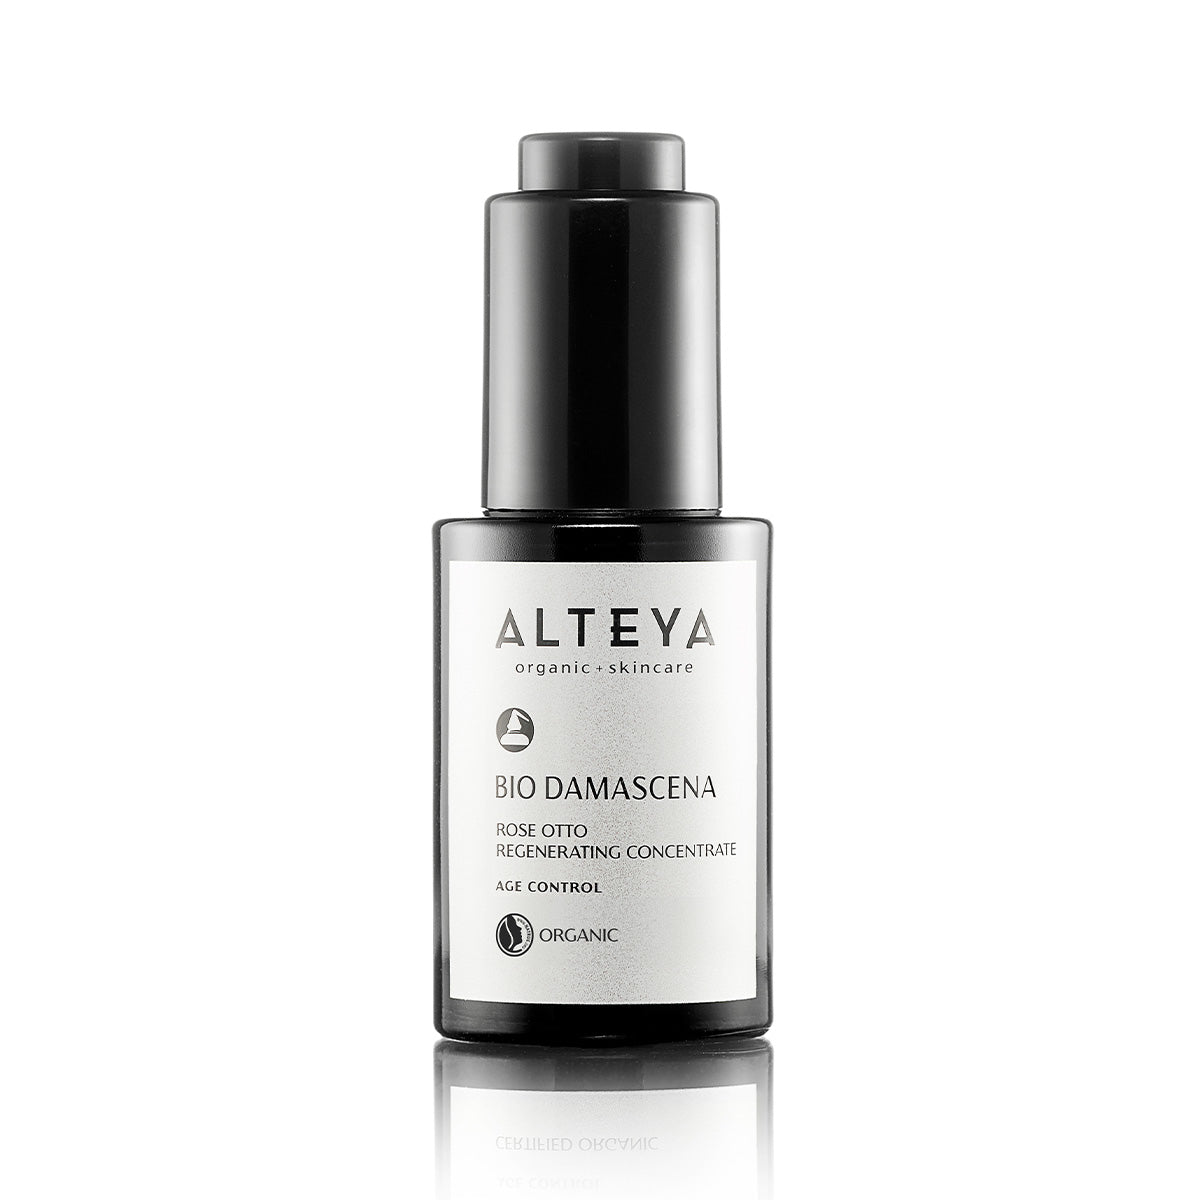 A black and white bottle of Alteya Organic Skincare's Bio Damascena Rose Otto Regenerating Concentrate, labeled as a high-performance serum for organic age control.